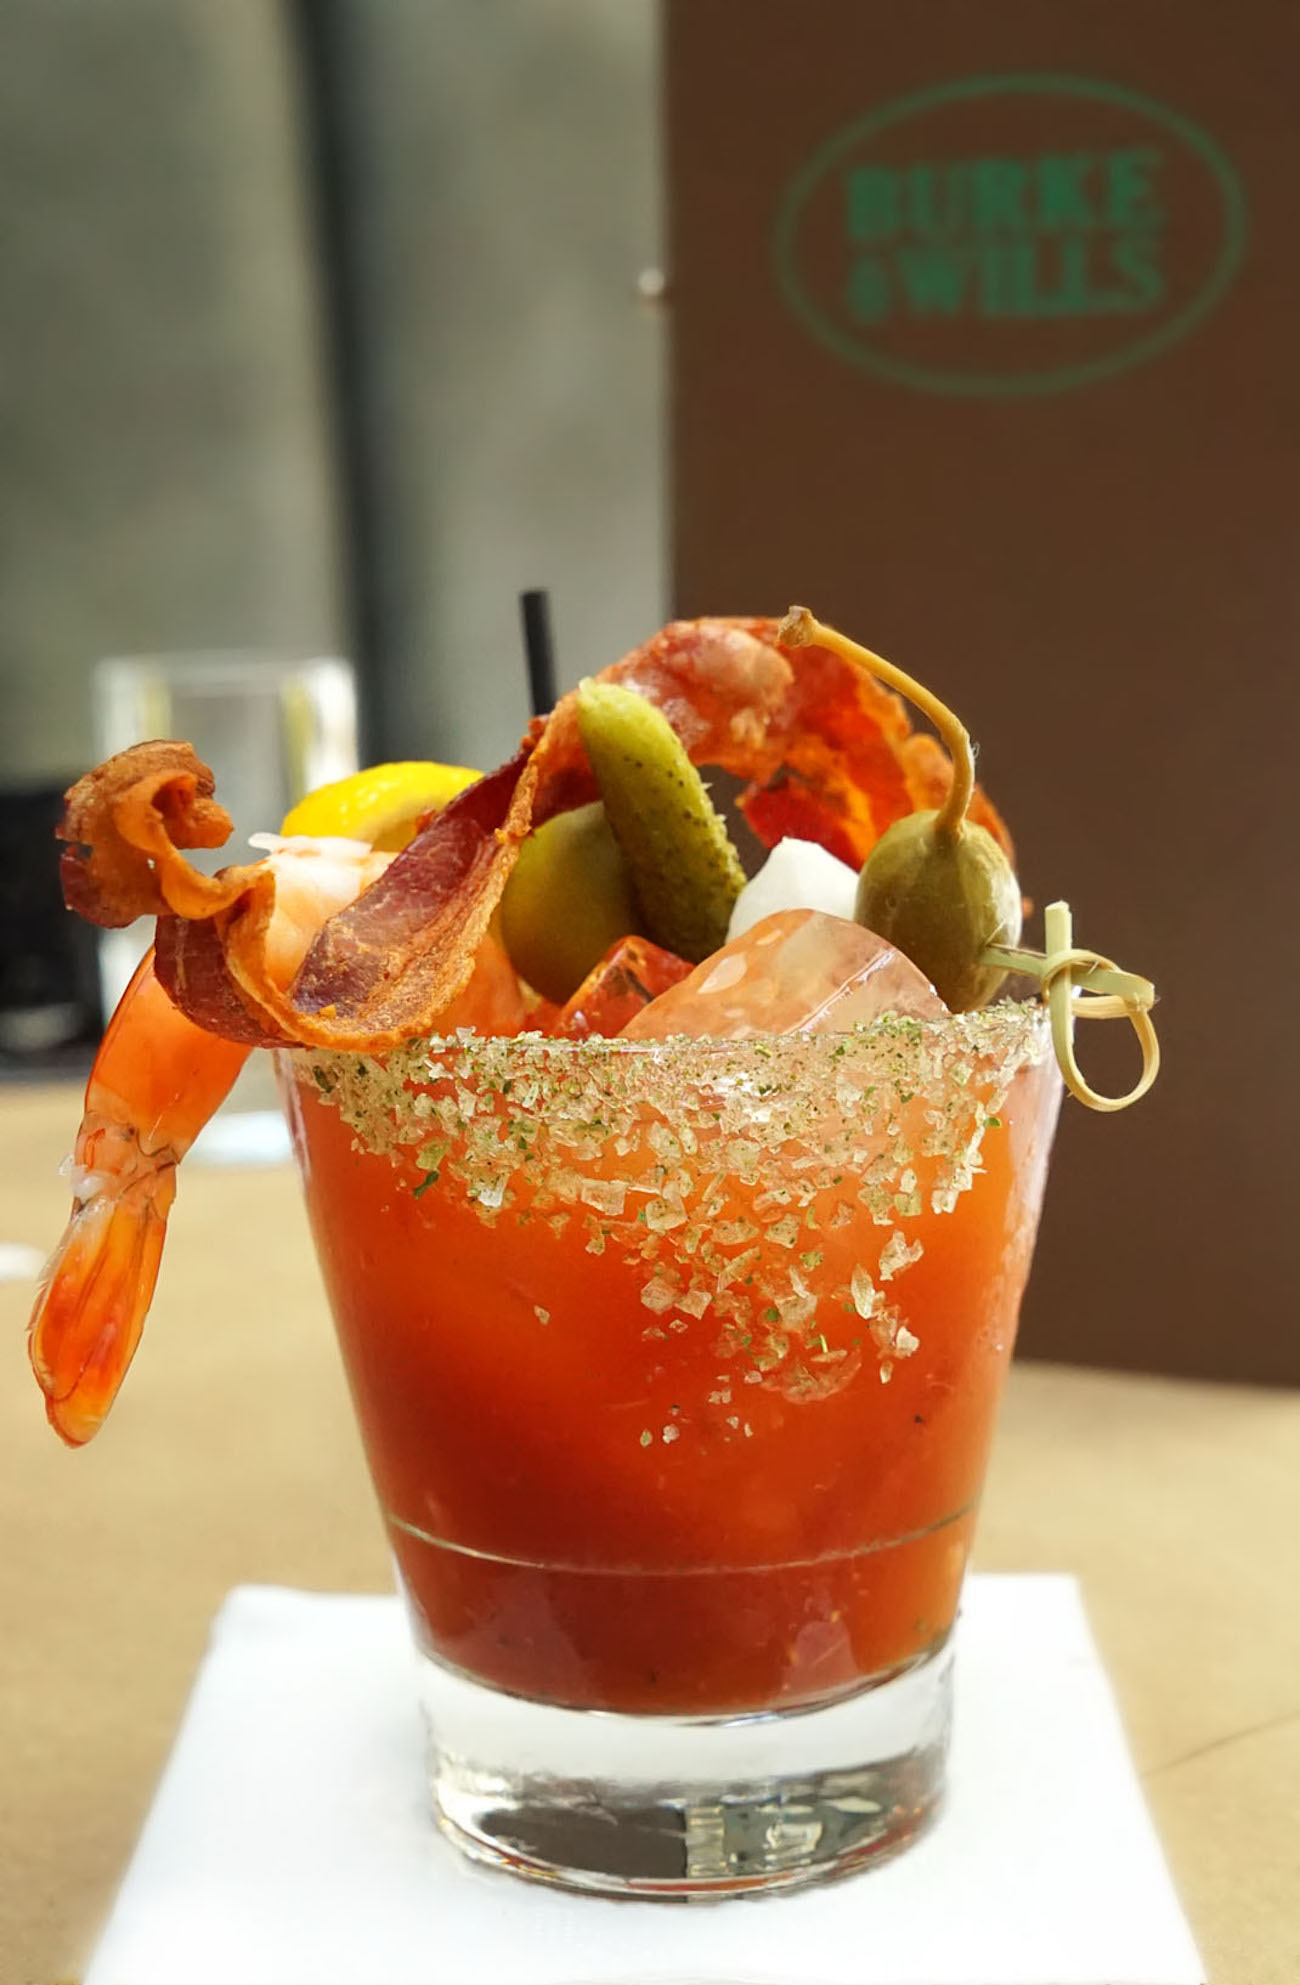 The Bloody Mary at Burke & Wills Australian Bistro